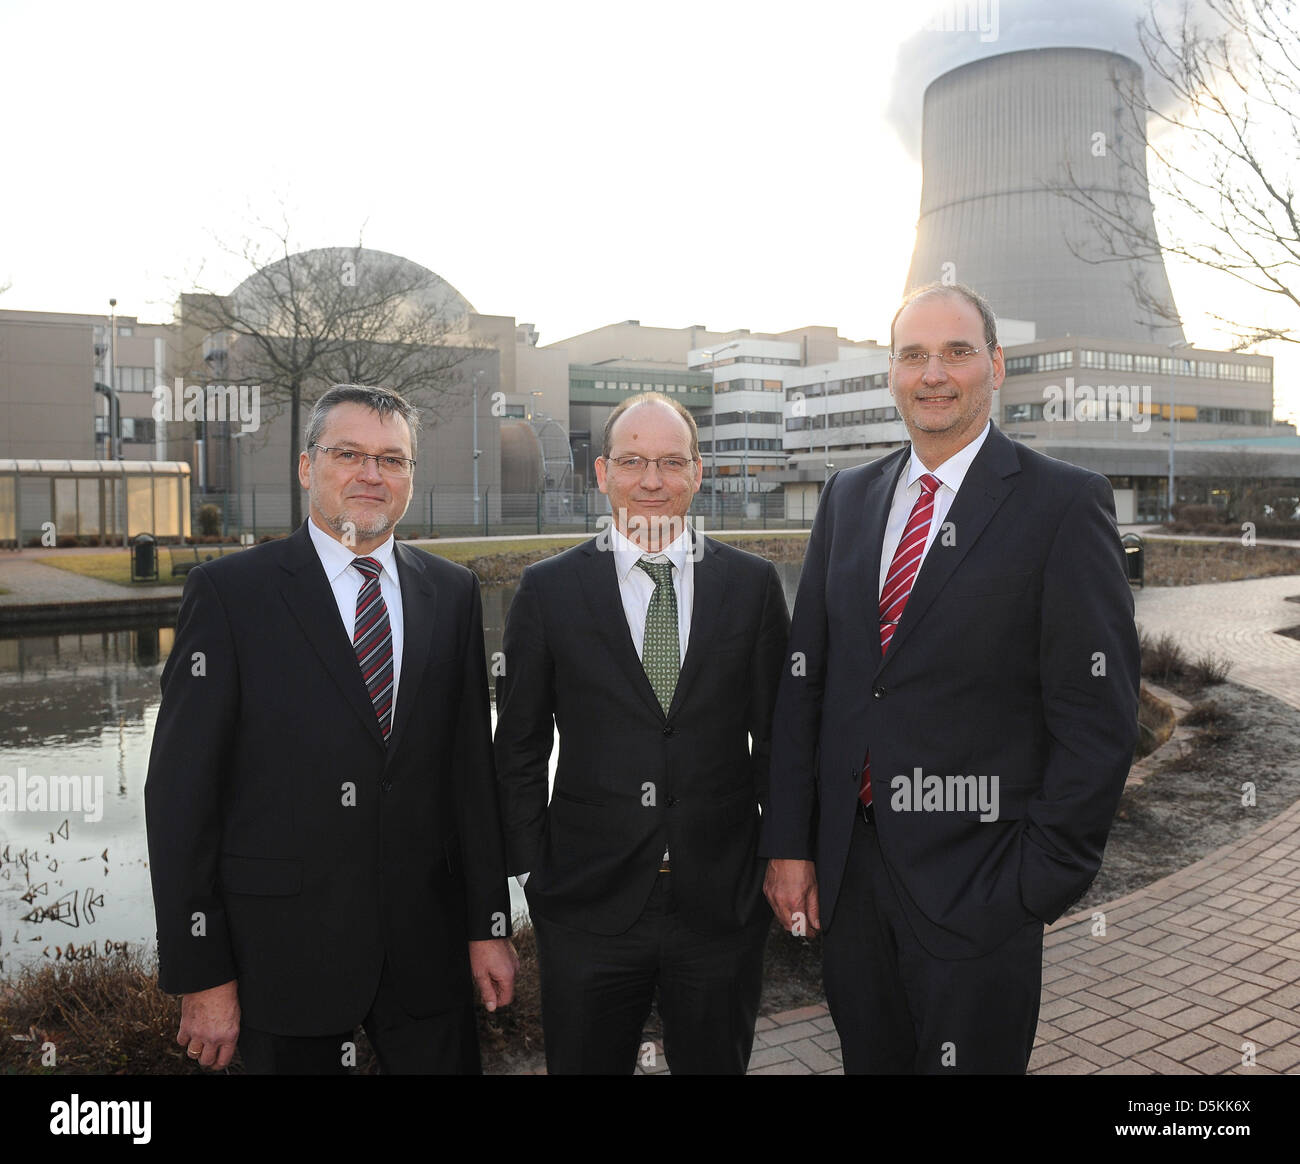 Chief of the atomic power plant Emsland, Juergen Haag (L-R), chief of the gas coal-fired RWE, Roger Miesen, and chief of the gas power station Emsland, Heinz-Juergen Wuellenweber, pose in front of a power plant after consultations in Lingen, Germany, 03 April 2013. Photo: Ingo Wagner Stock Photo